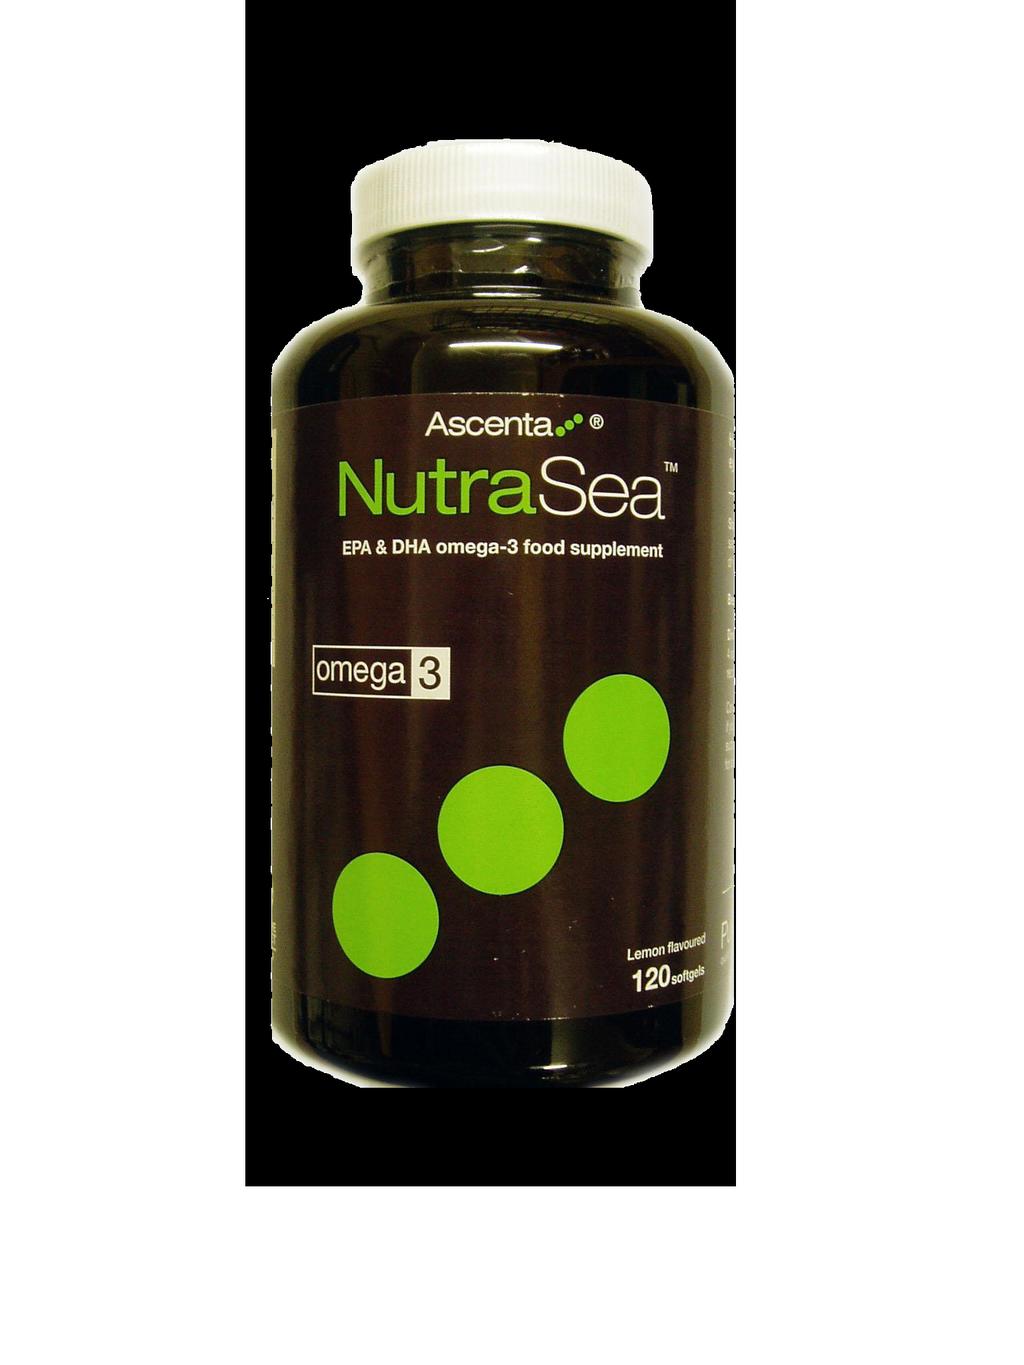 Nutrasea Why you need omega-3. Omega-3 fatty acids are "good fats" that are essential for optimal health.